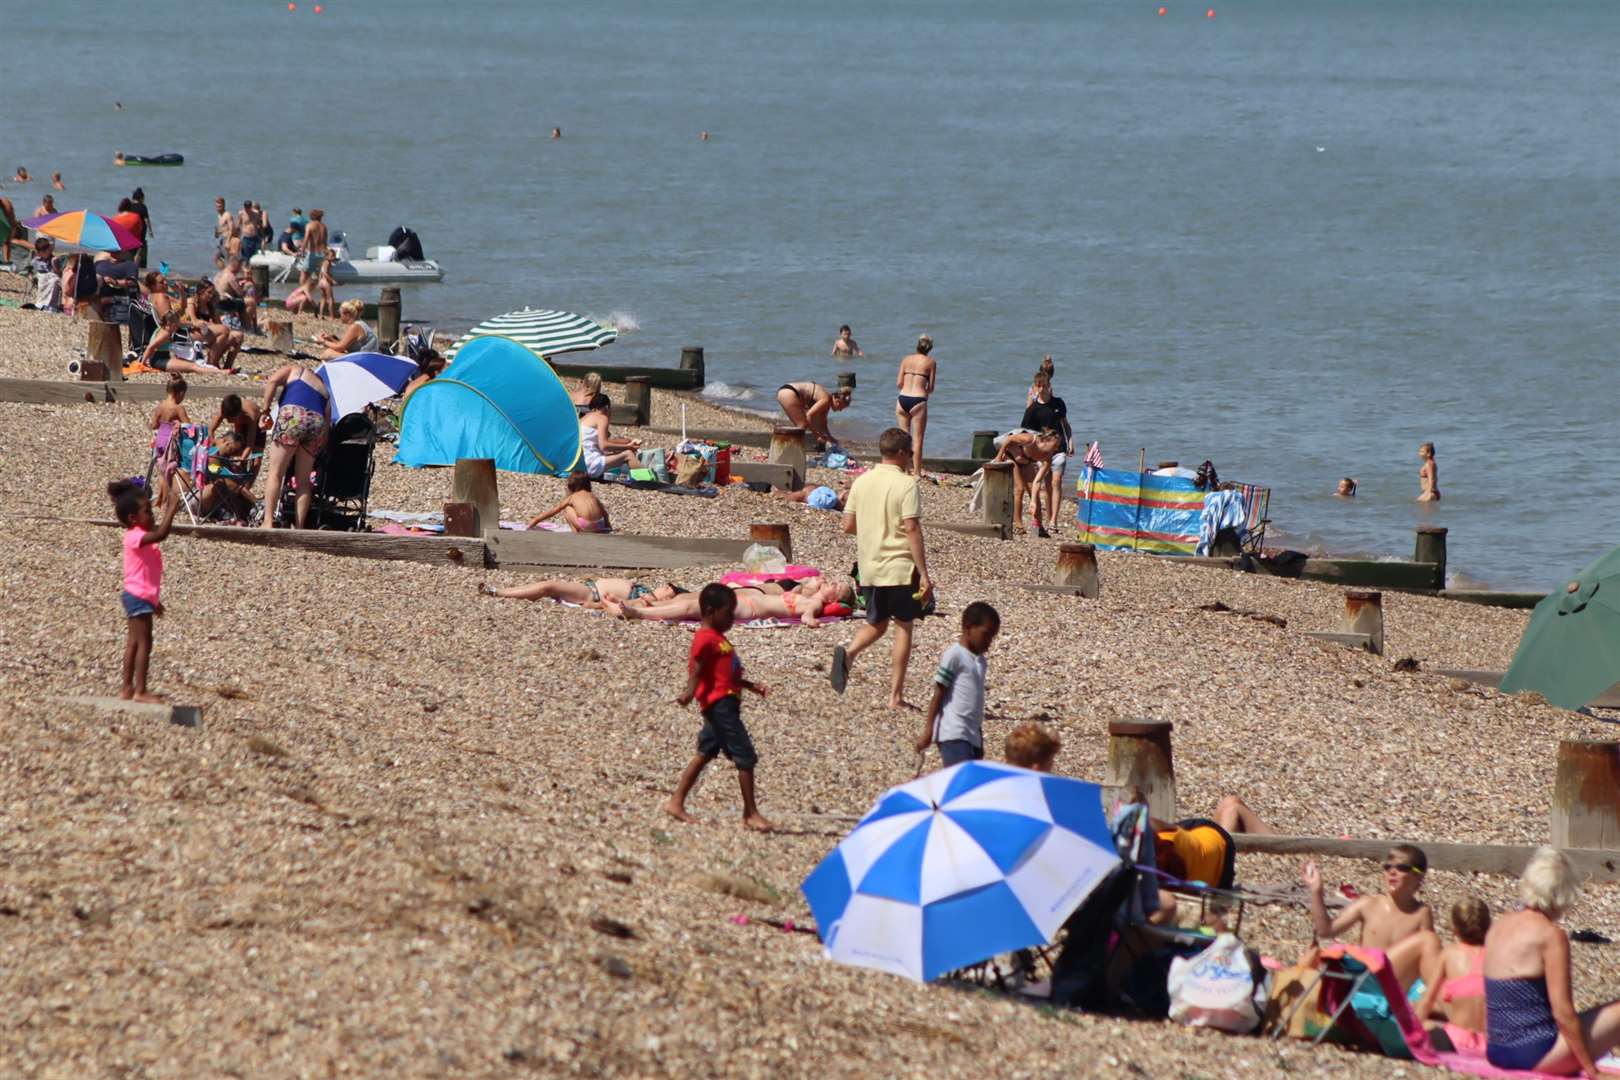 Temperatures are expected to reach 30C today ahead of next week's heatwave